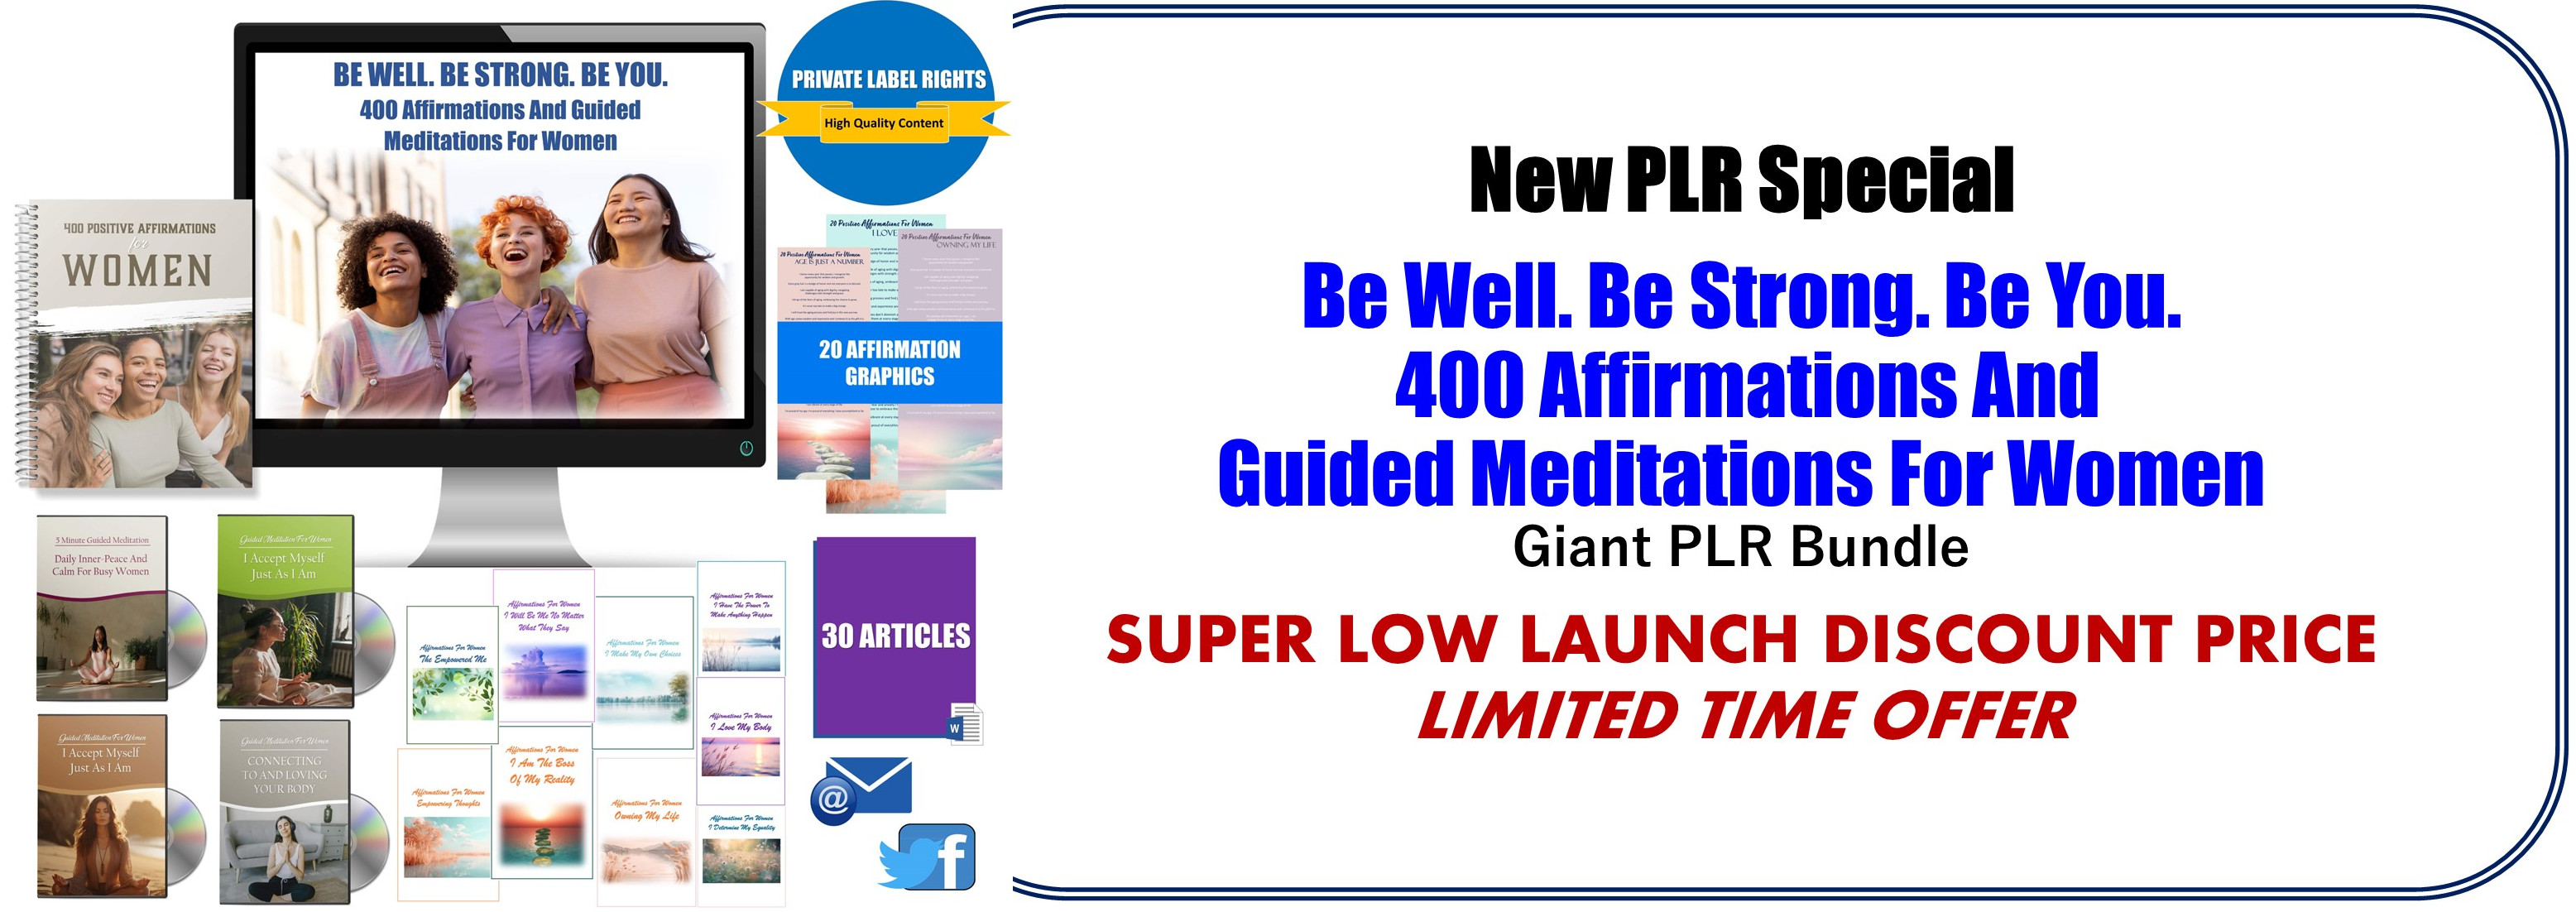 6 Lesson eCourse - Beginner's Guide To Personal Growth And Development 300+ Piece PLR Pack